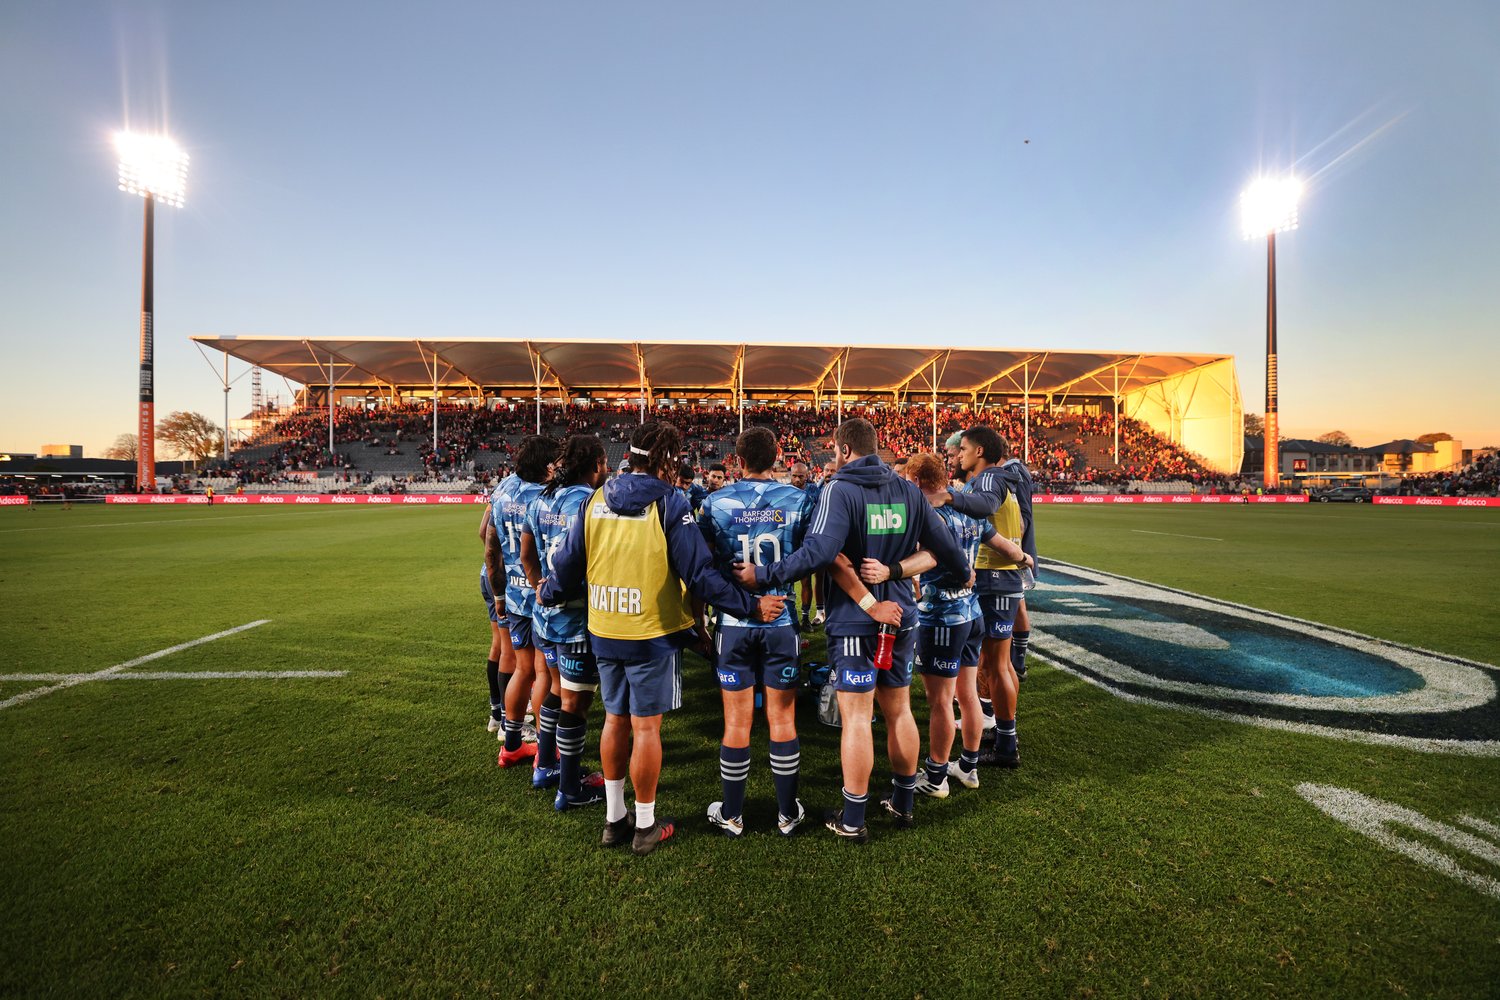 THE BLUES CHASE GOOD FRIDAY AGAINST CRUSADERS IN CHRISTCHURCH — Blues Rugby